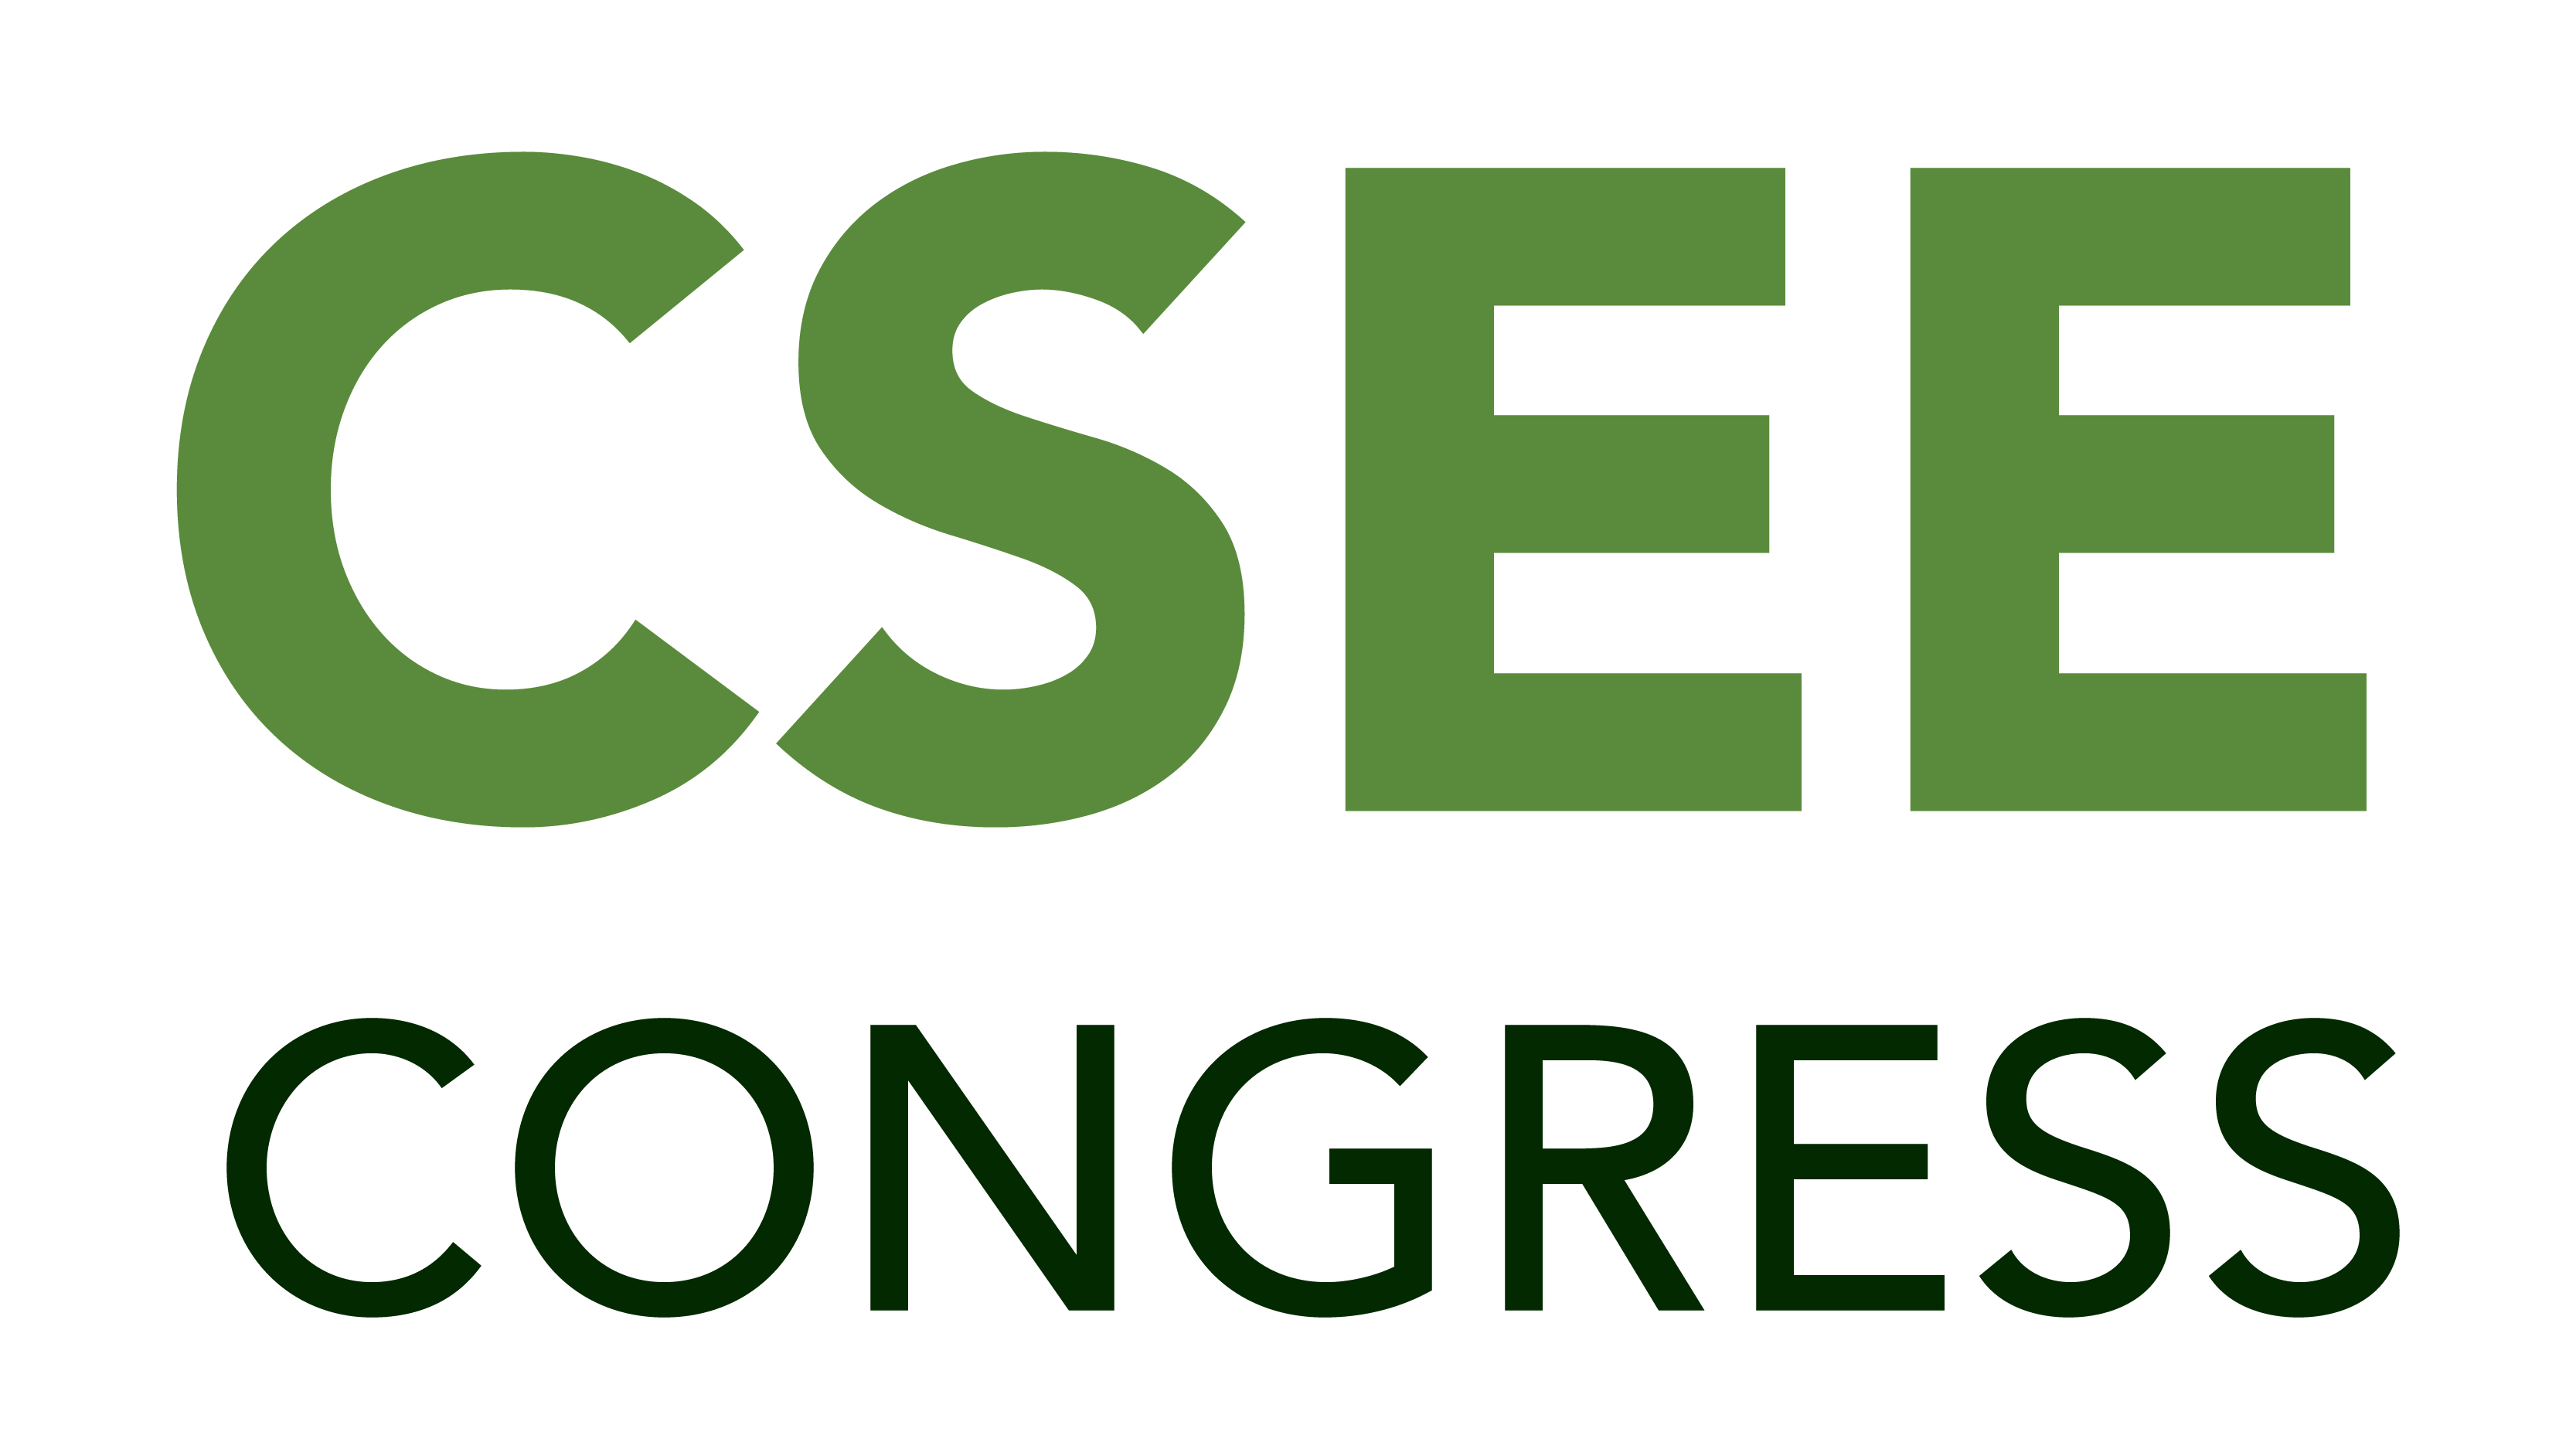 6th World Congress on Civil, Structural, and Environmental Engineering, Rome, Italy, June 21 - 23, 2021